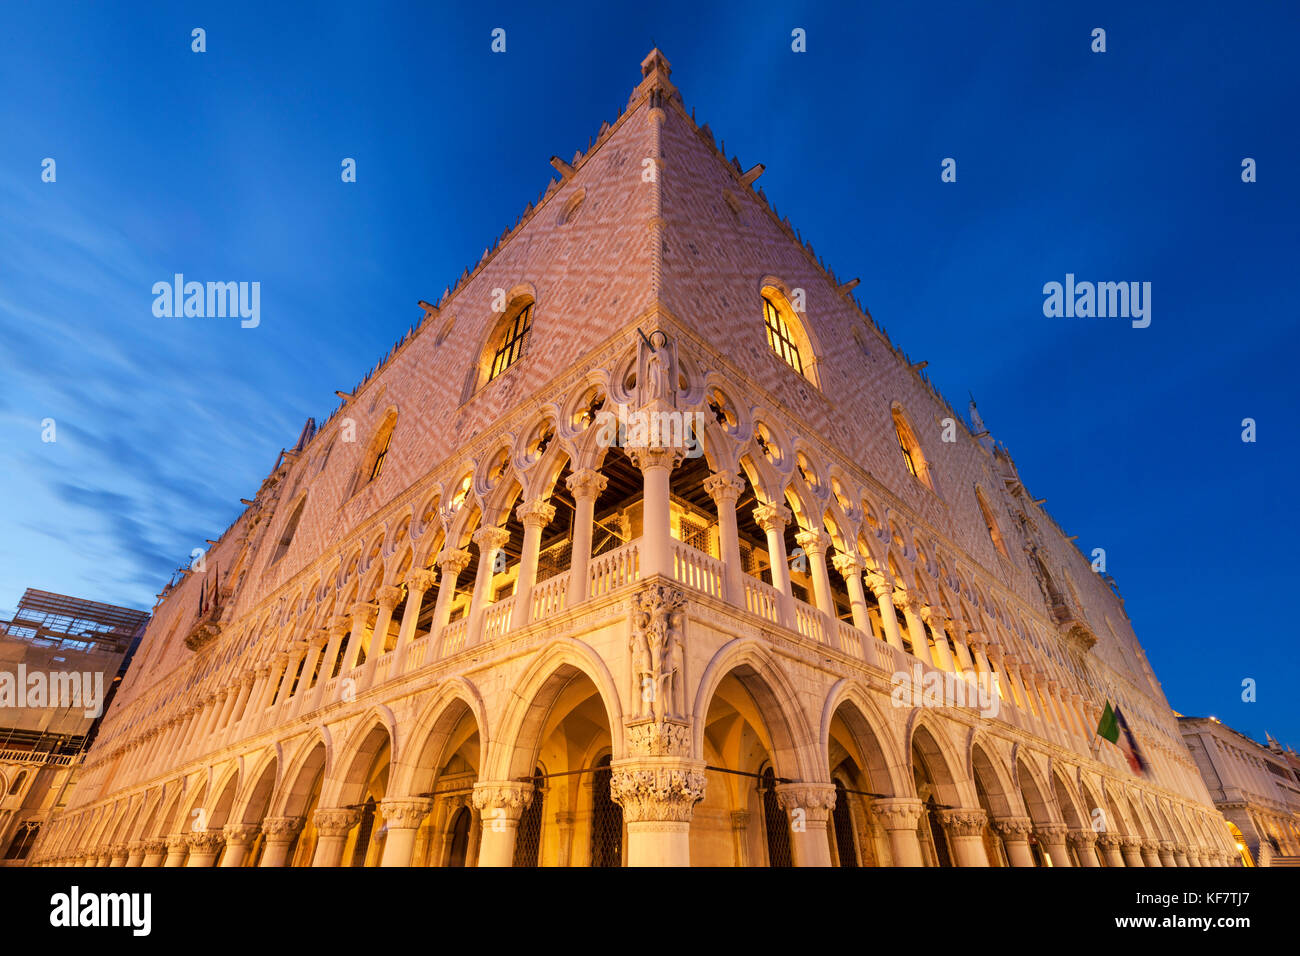 VENICE ITALY VENICE  the Doges Palace at night Palazzo Ducale at night St marks Square Piazza san marco Venice Italy EU Europe Stock Photo